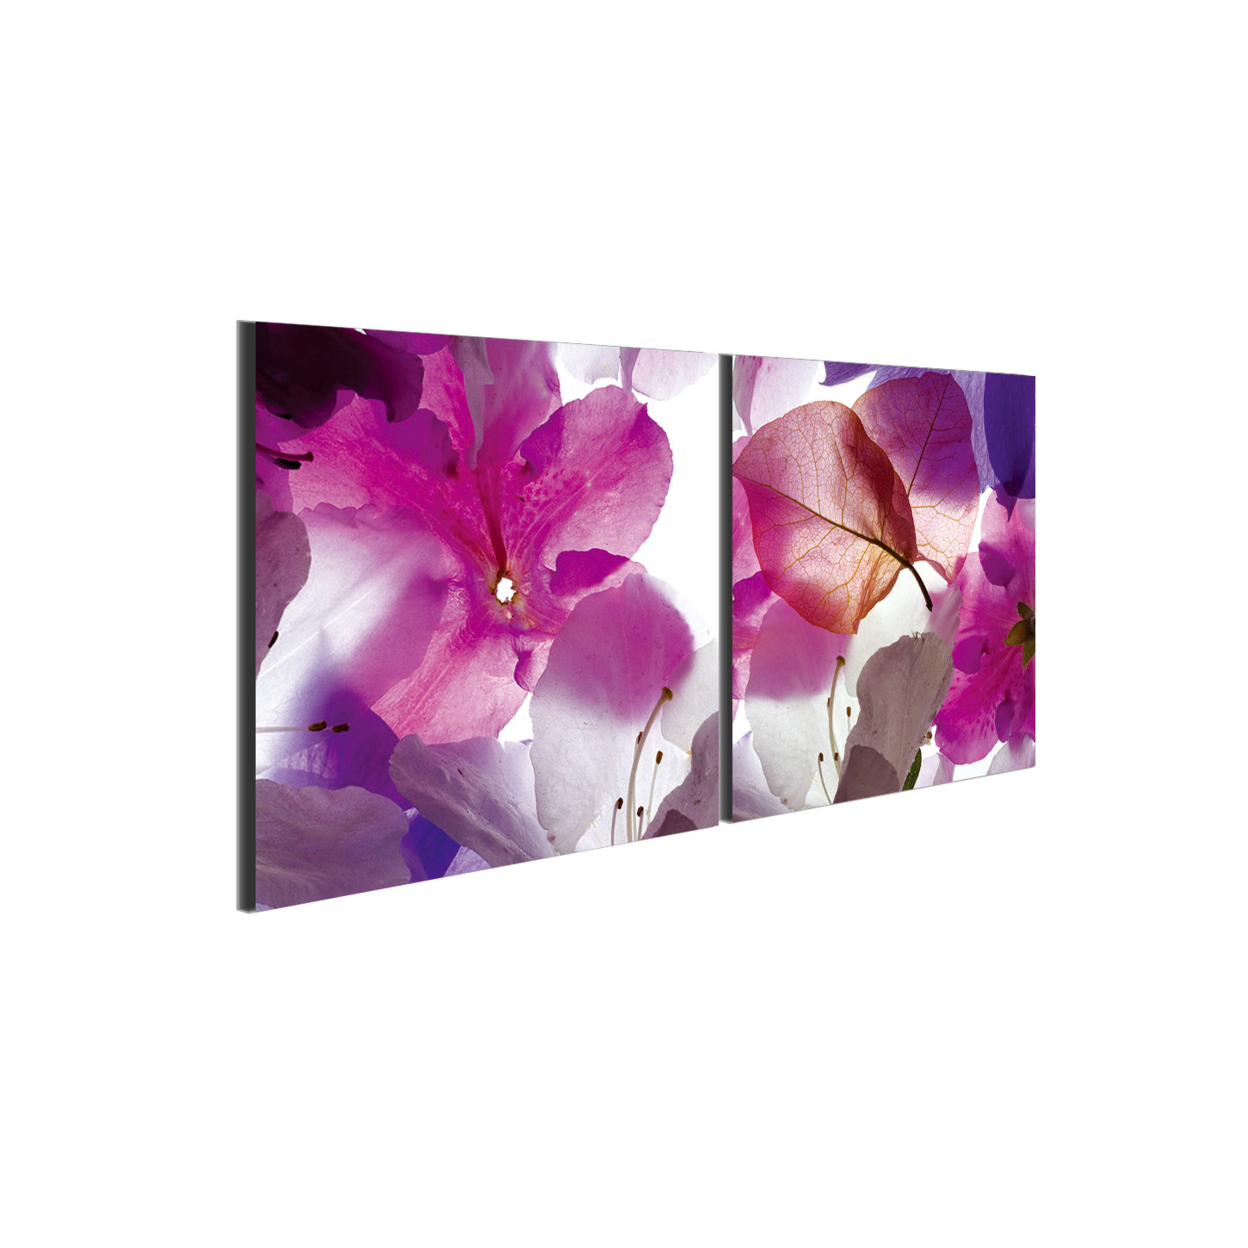 Orchid 2 Piece Wrapped Canvas Wall Art Print 27.5x55 Inches